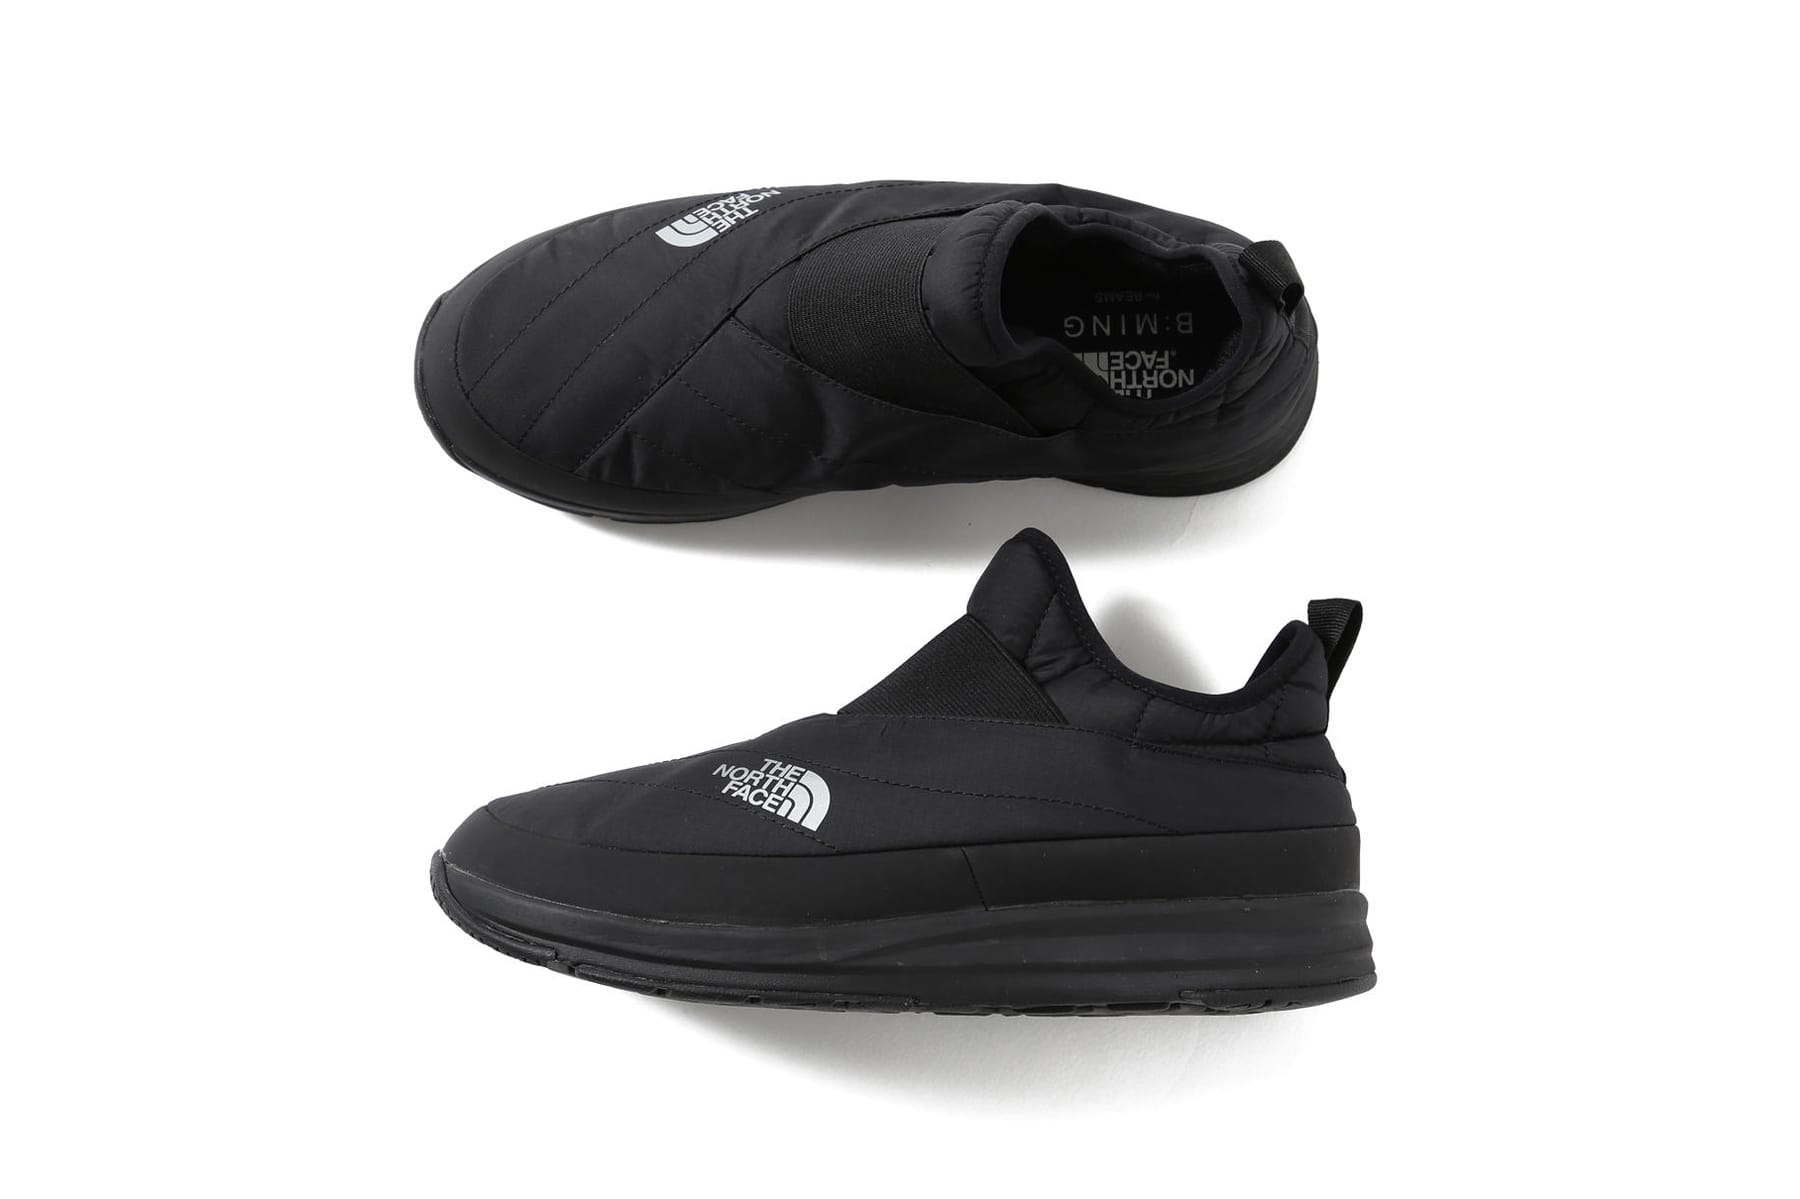 north face insulated slippers